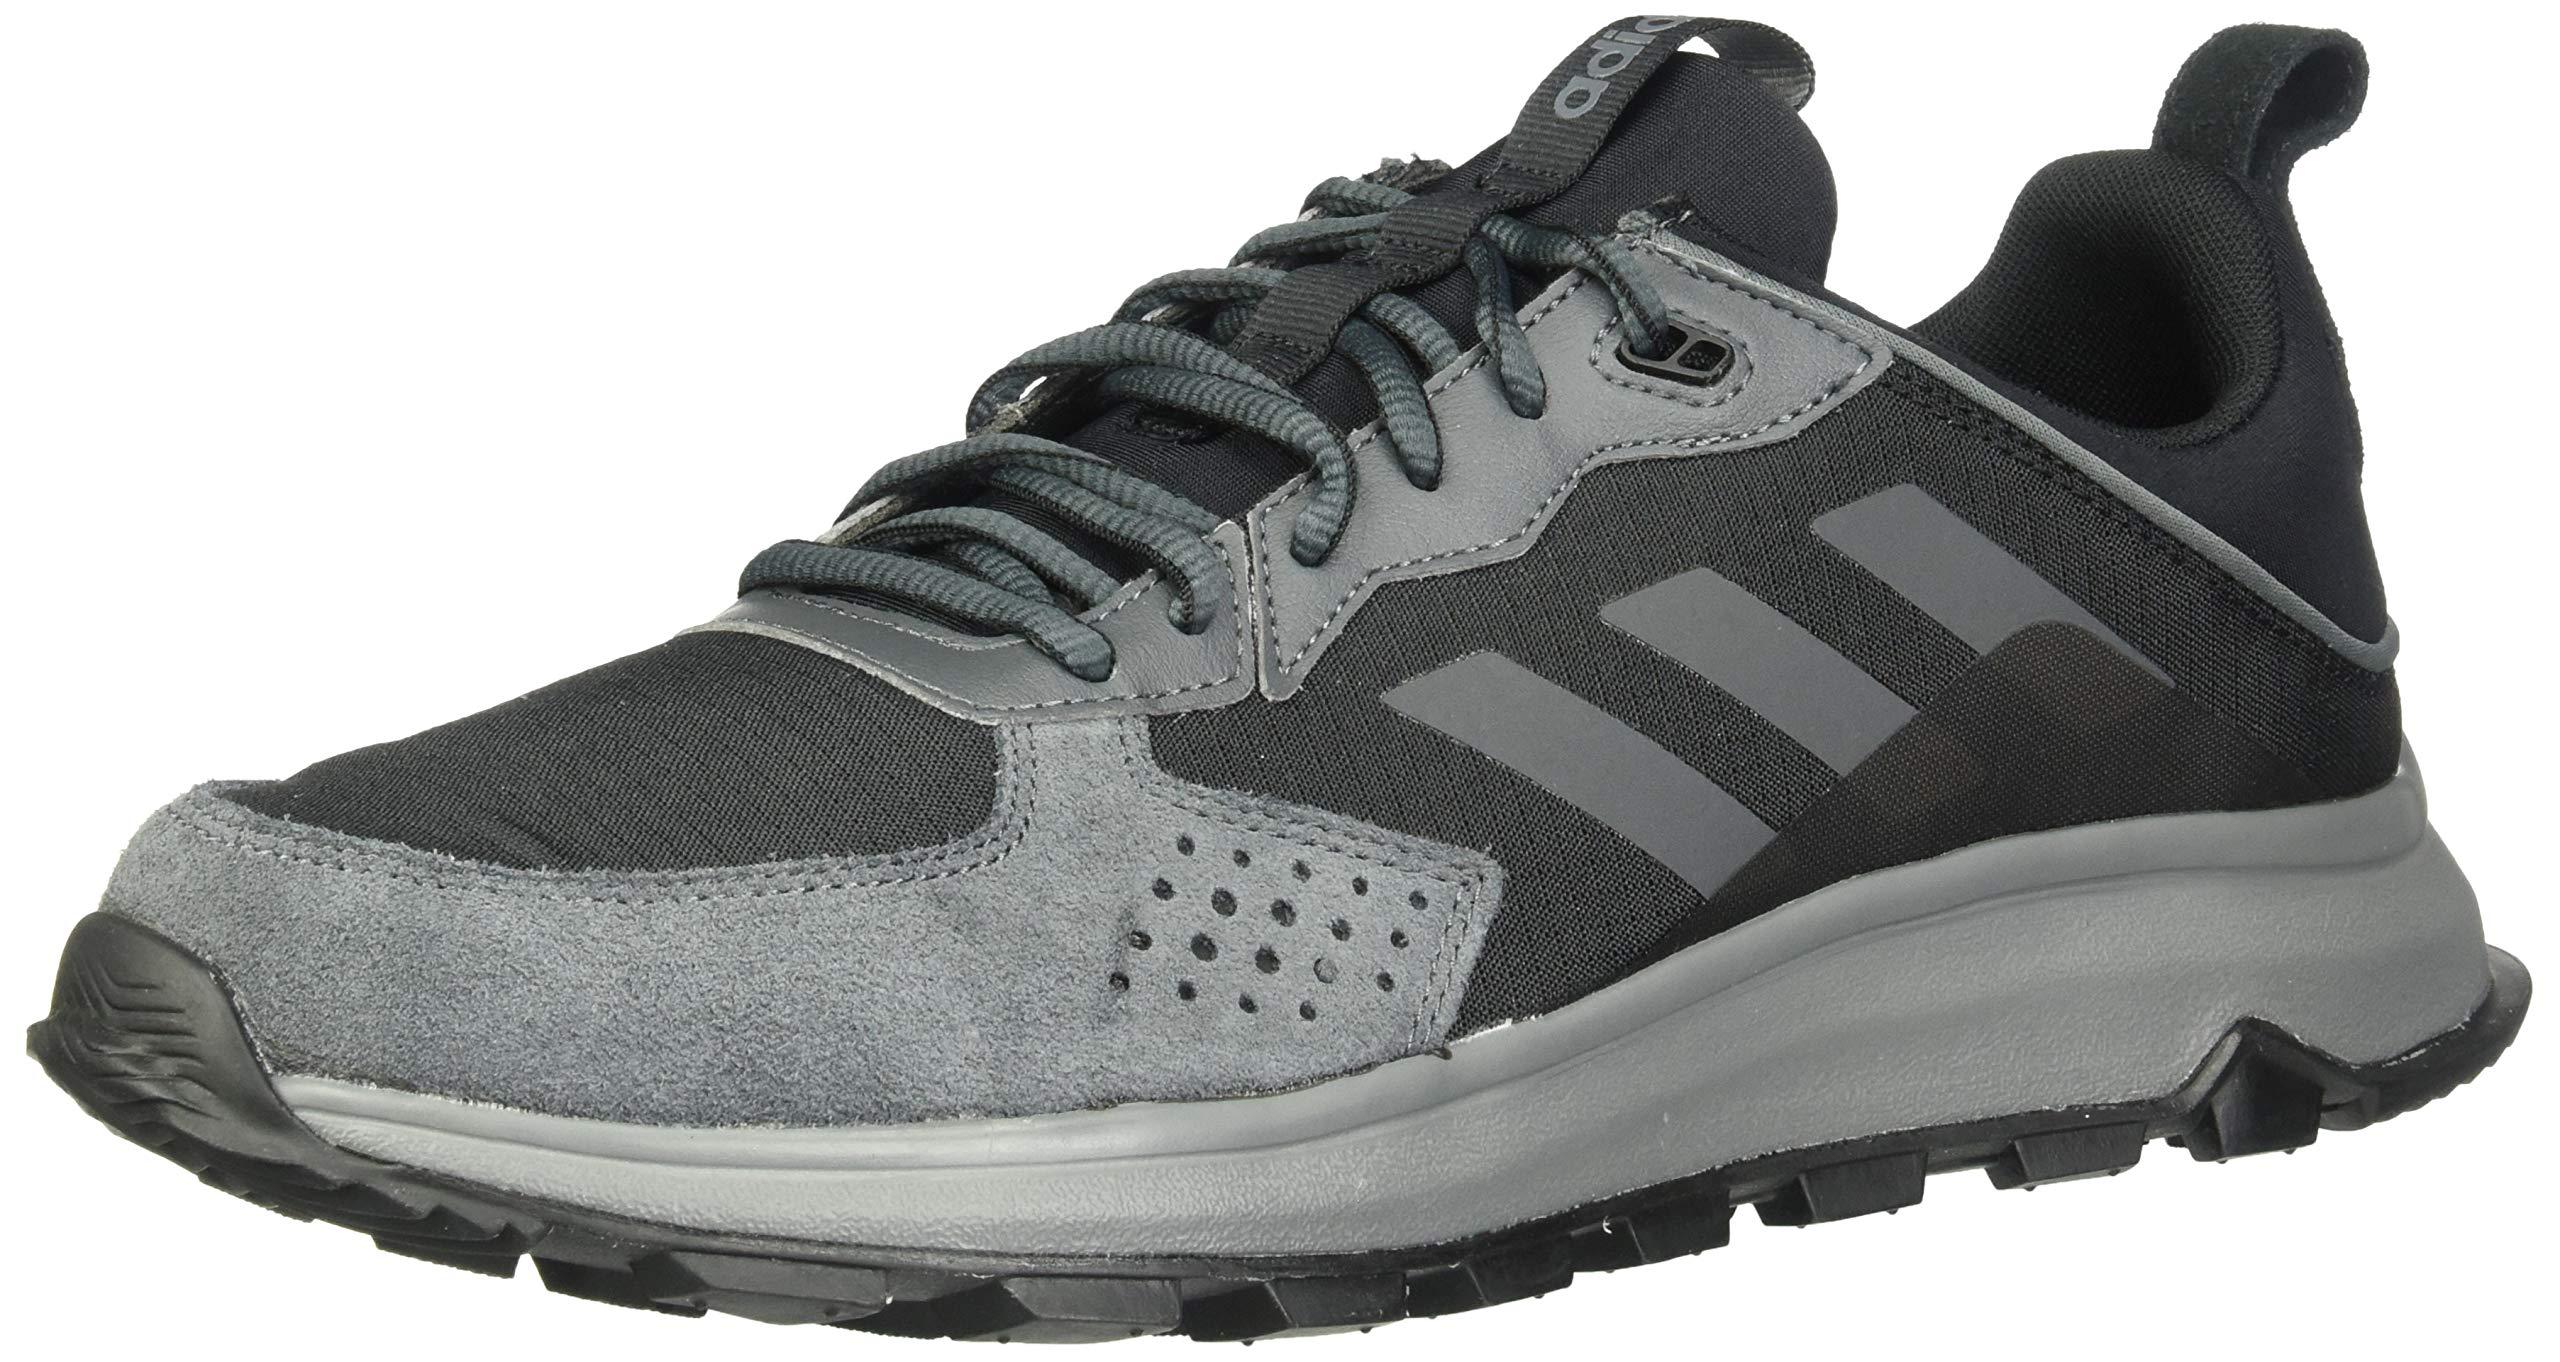 adidas Response Trail Running Shoe in Black for Men - Save 5% - Lyst